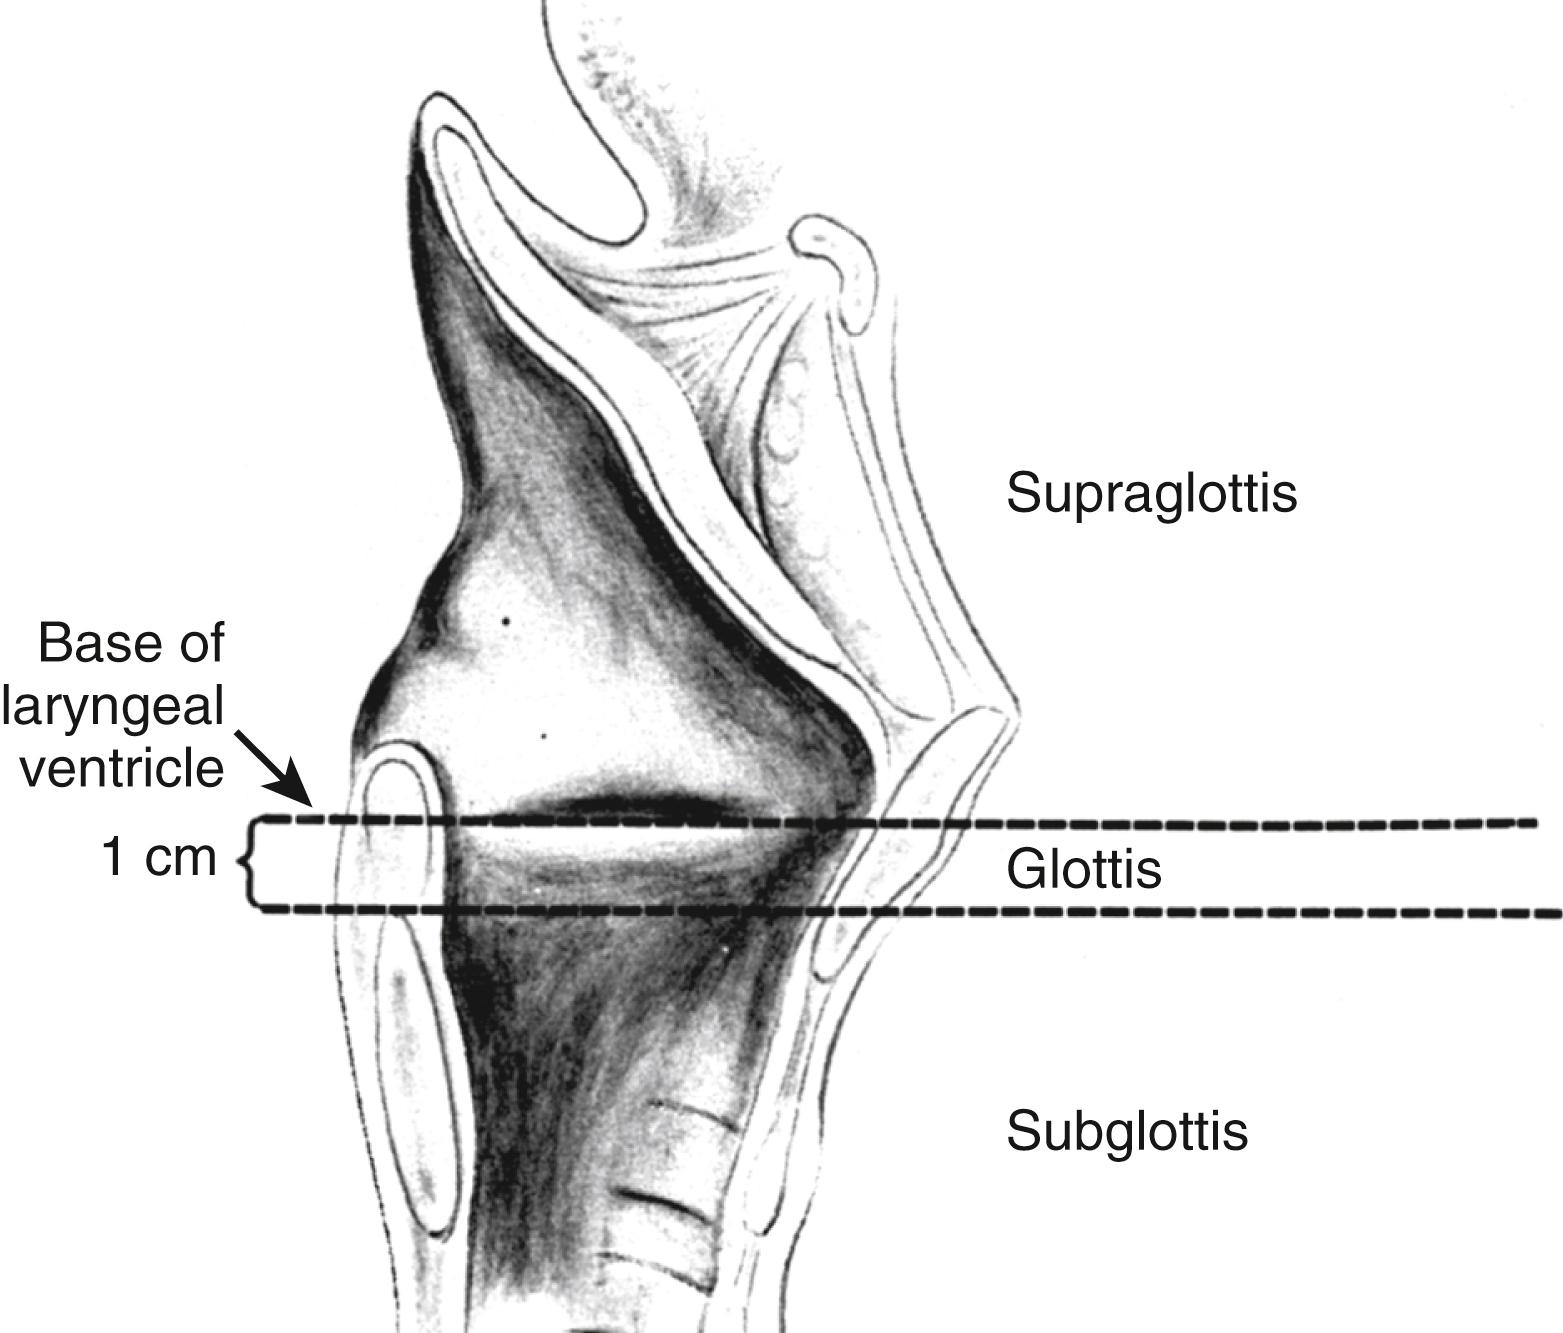 Fig. 8.1, Sagittal drawing of the larynx depicting the three anatomic areas. The glottic larynx extends from the free edge of the true vocal cord inferiorly 1 cm. This approximates the histologic observation of stratified squamous epithelium on the glottis changing to respiratory epithelium of the subglottis.